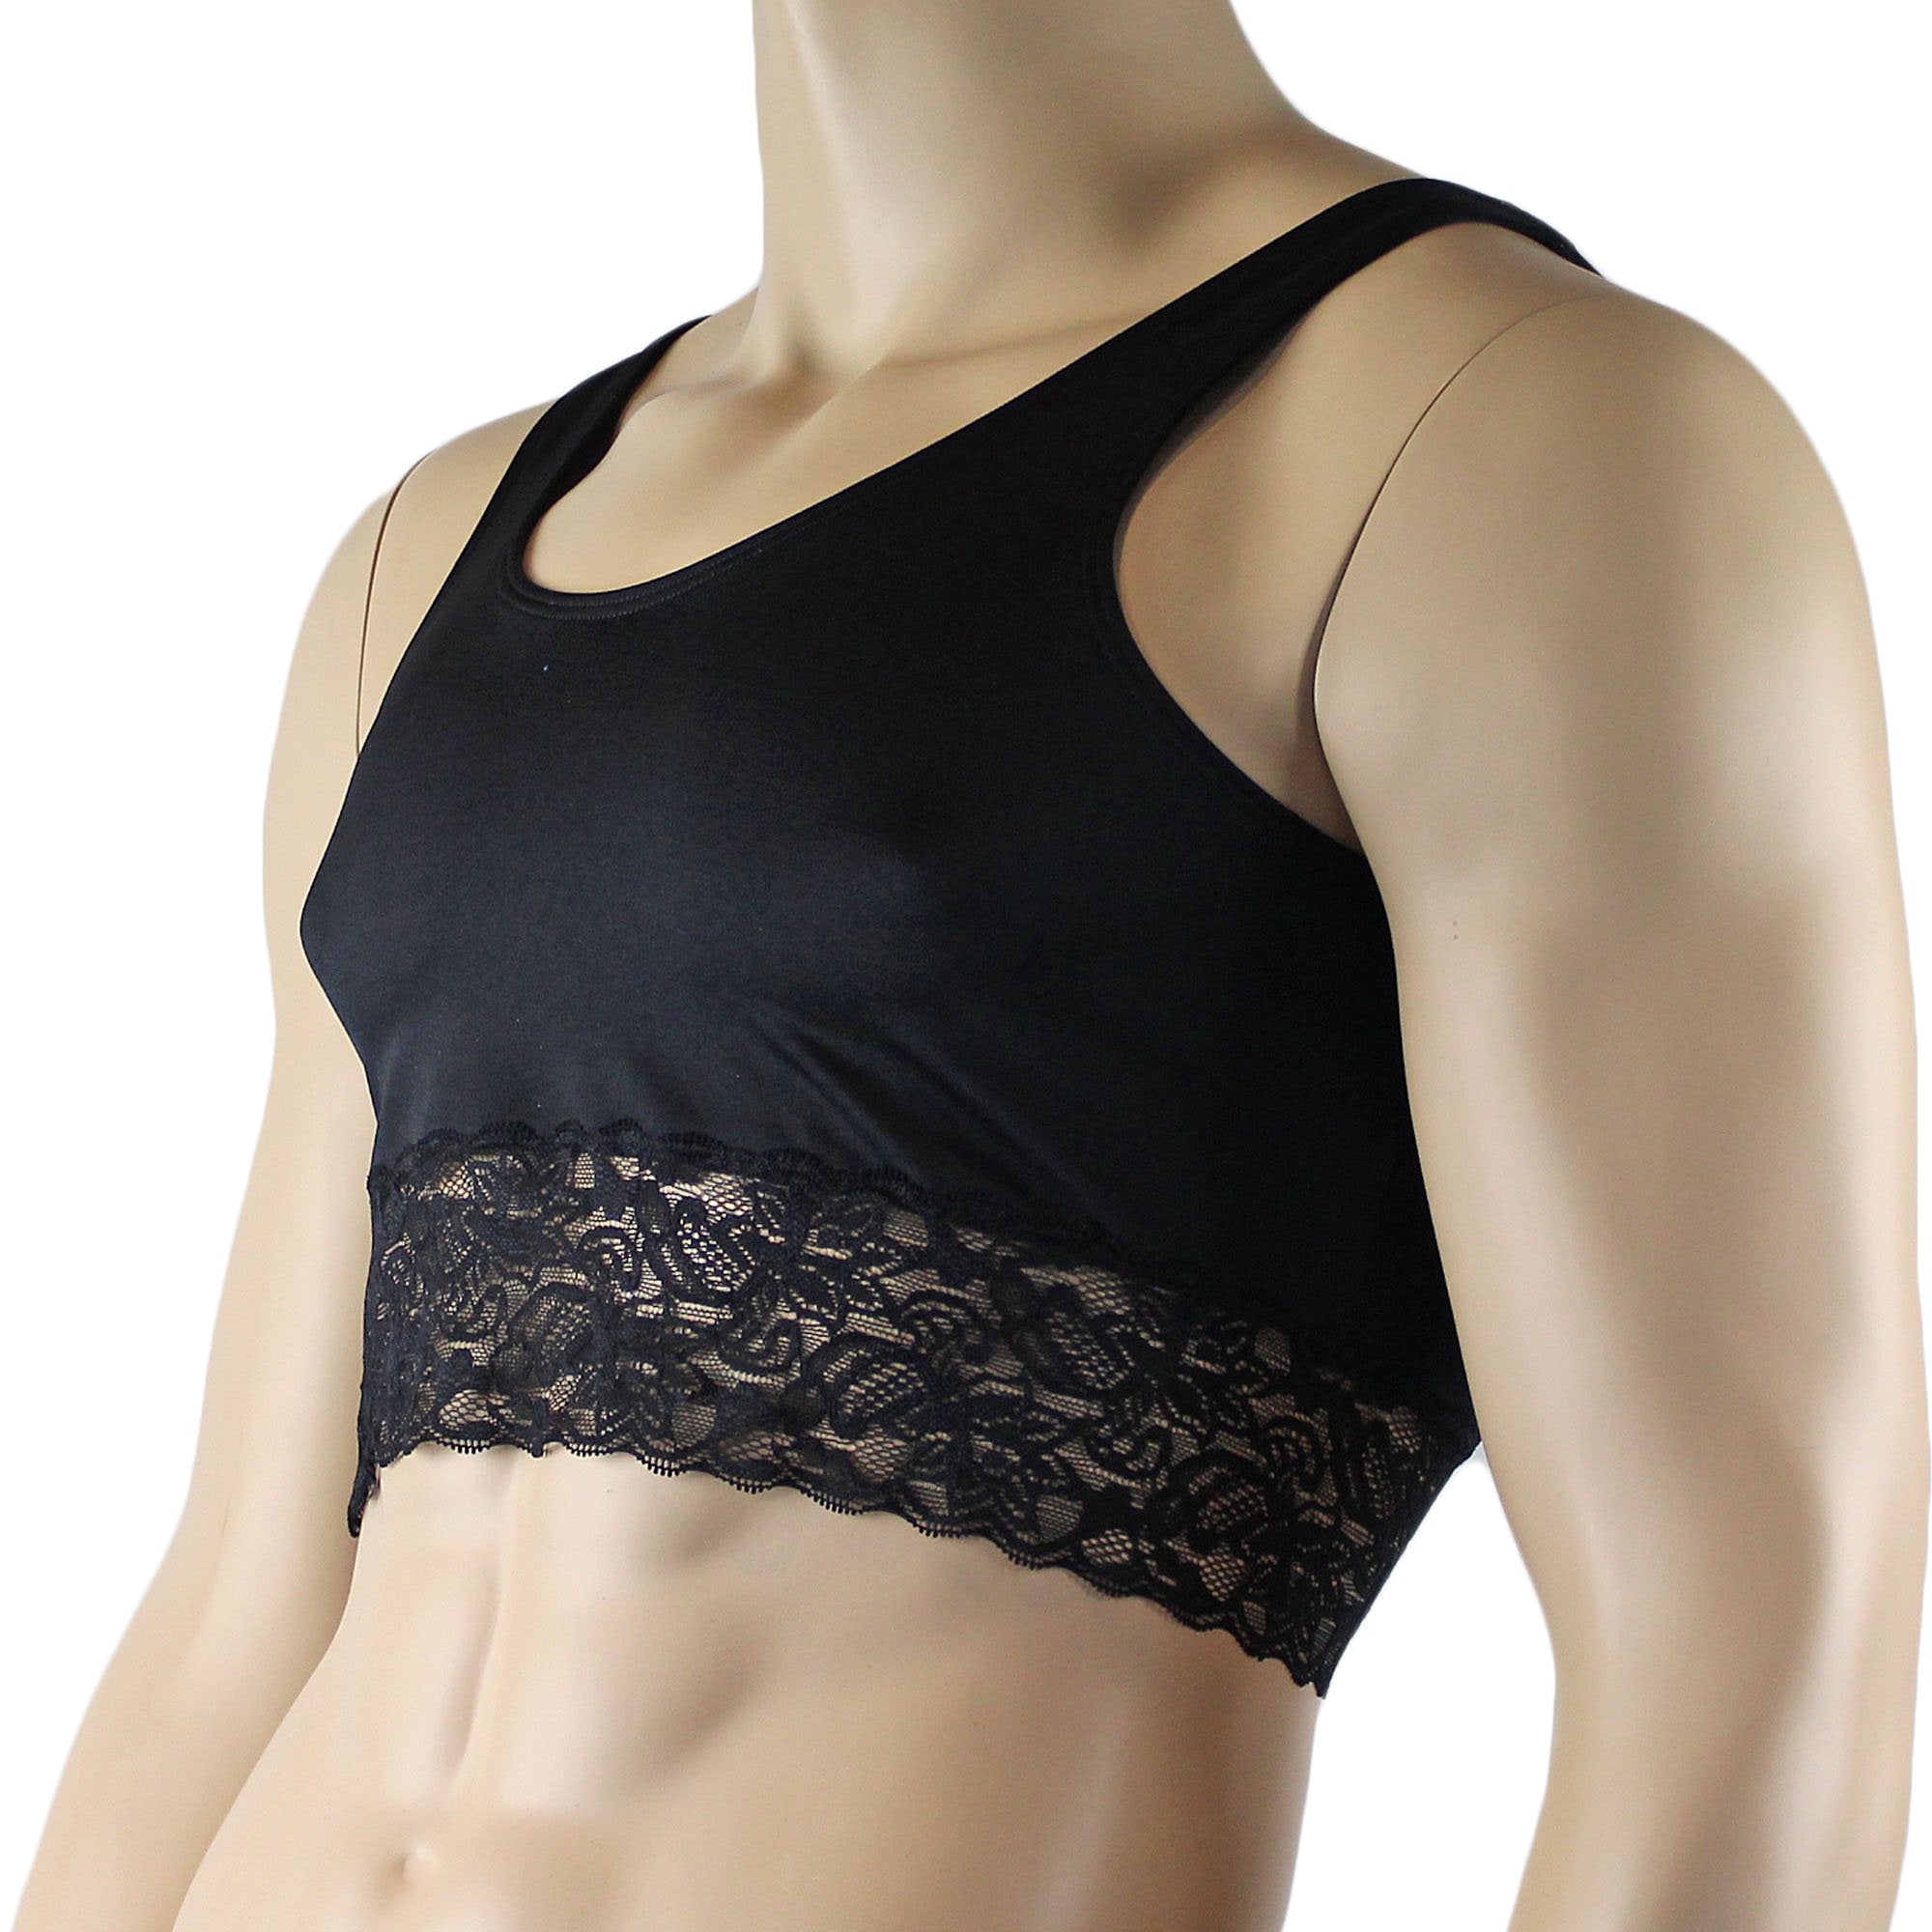 Male Penny Lingerie Bra Camisole Top with Lace Black